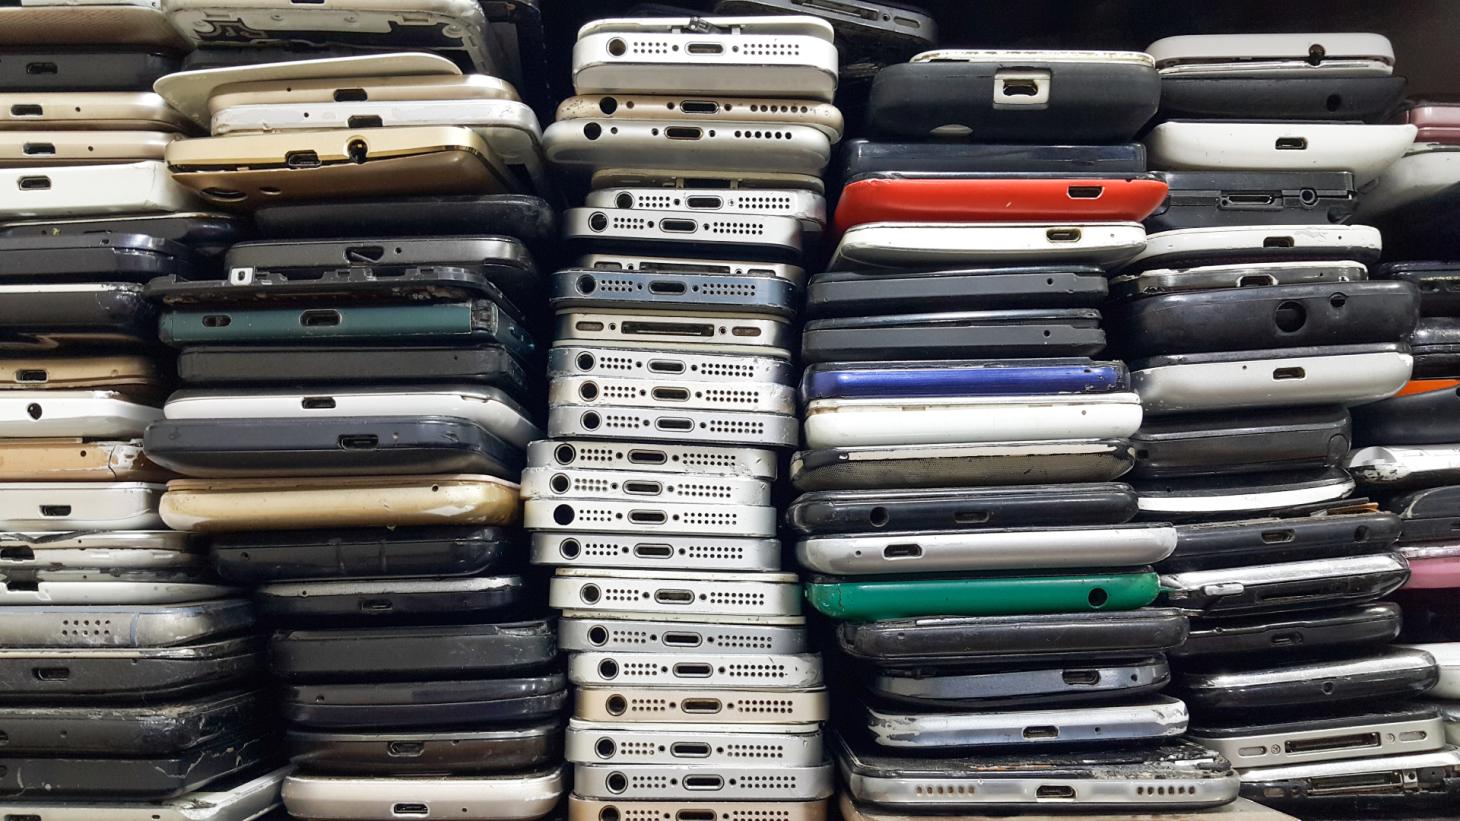 A stack of cell phones